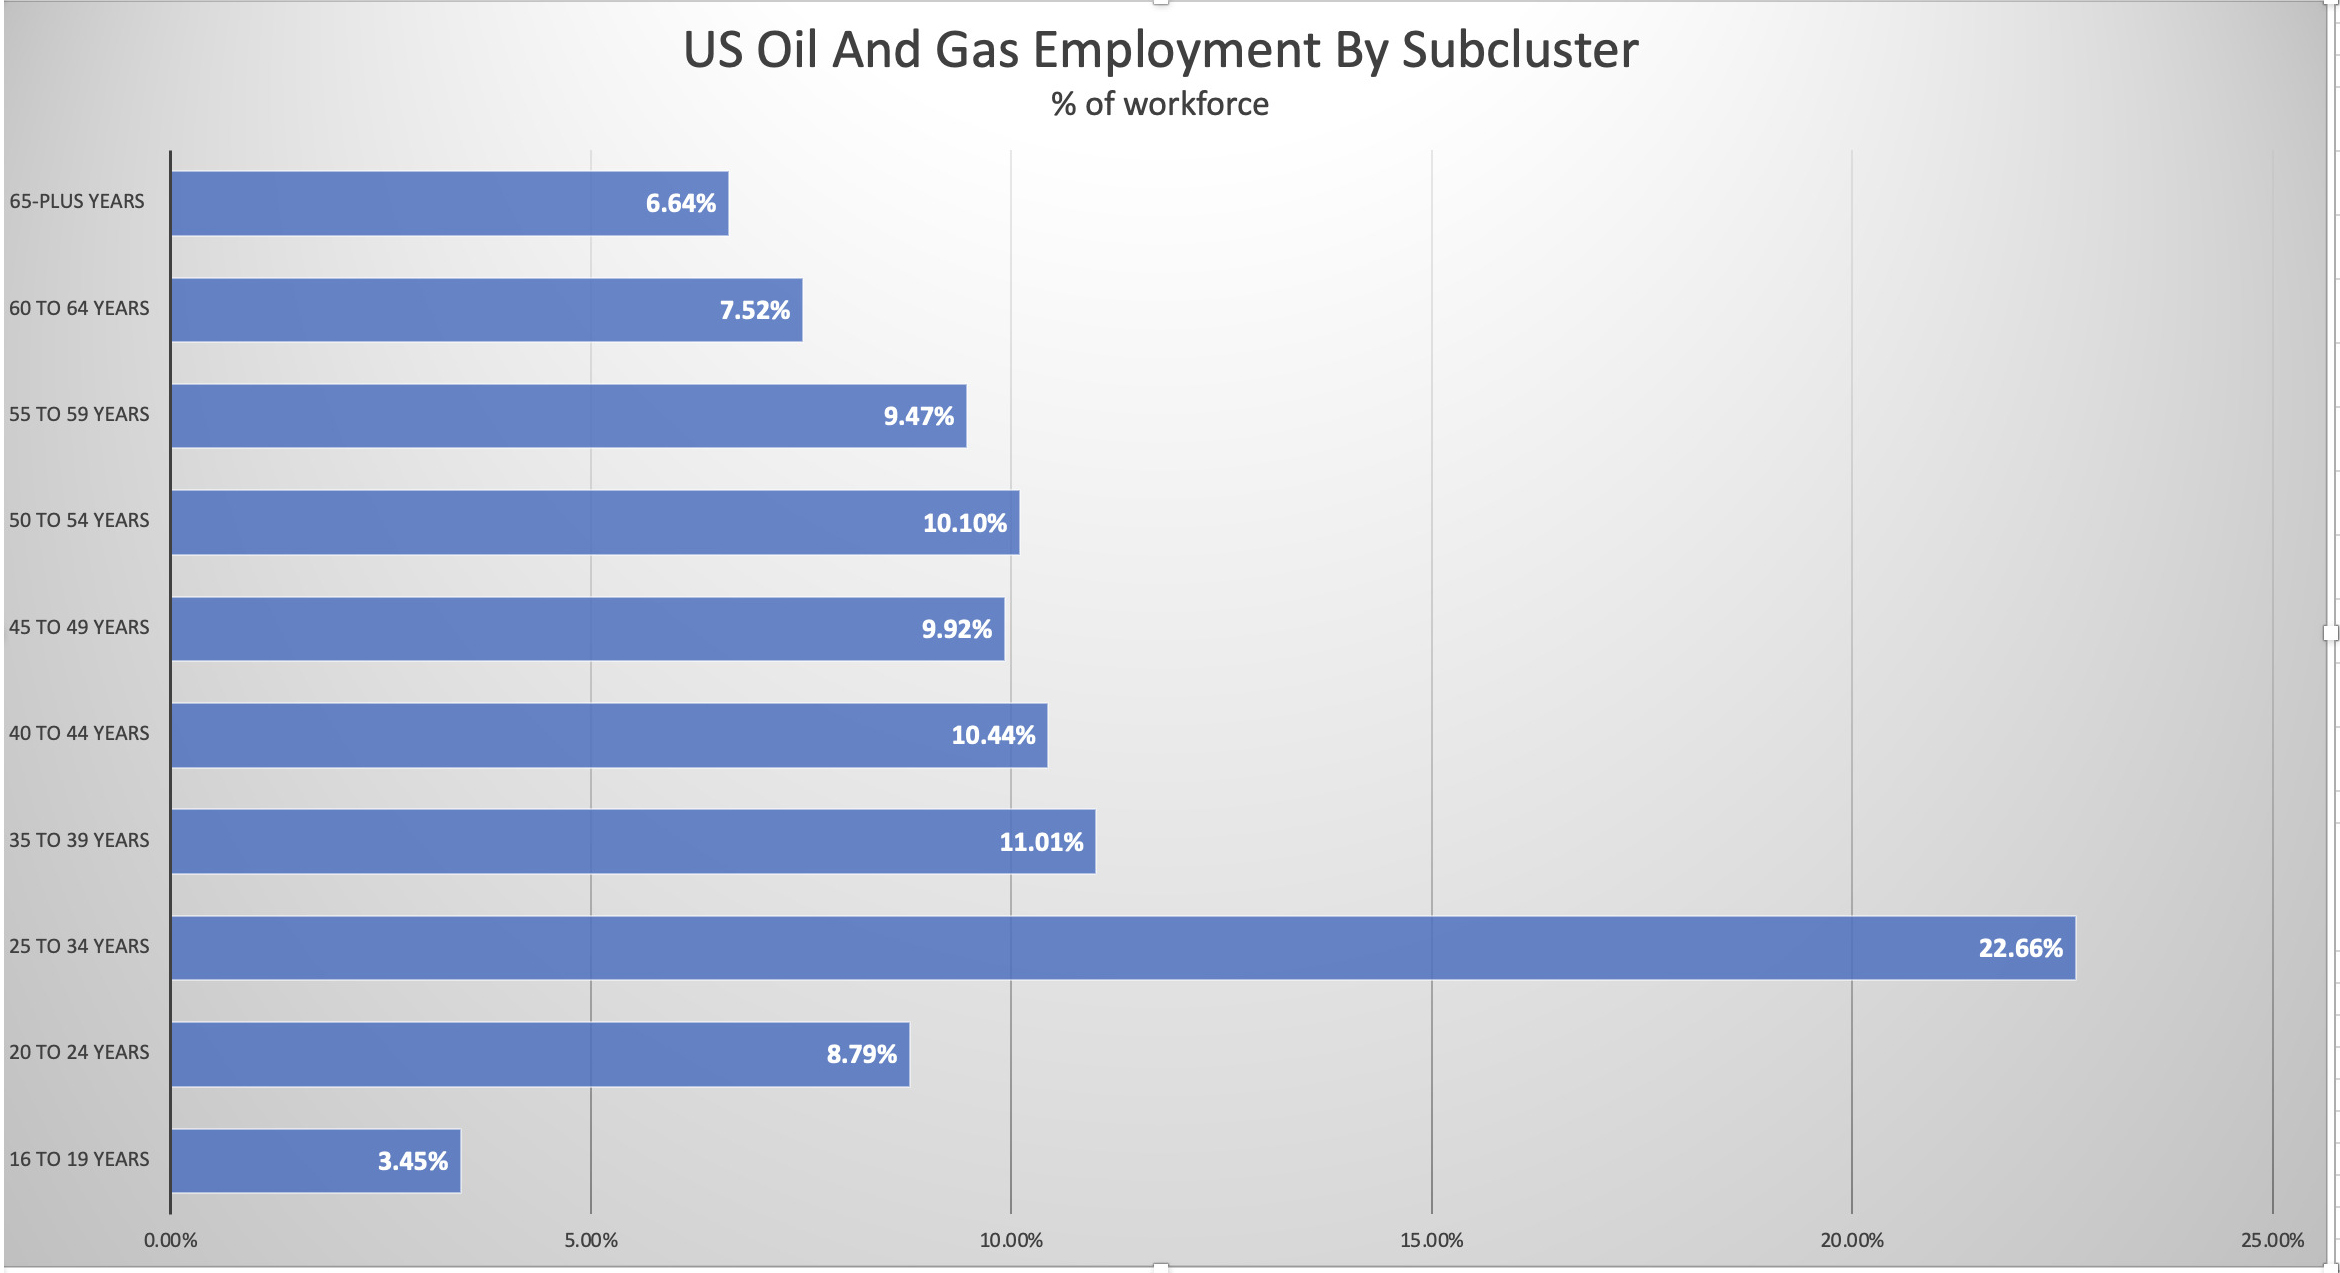 US Oil and Gas Employment by Age Group